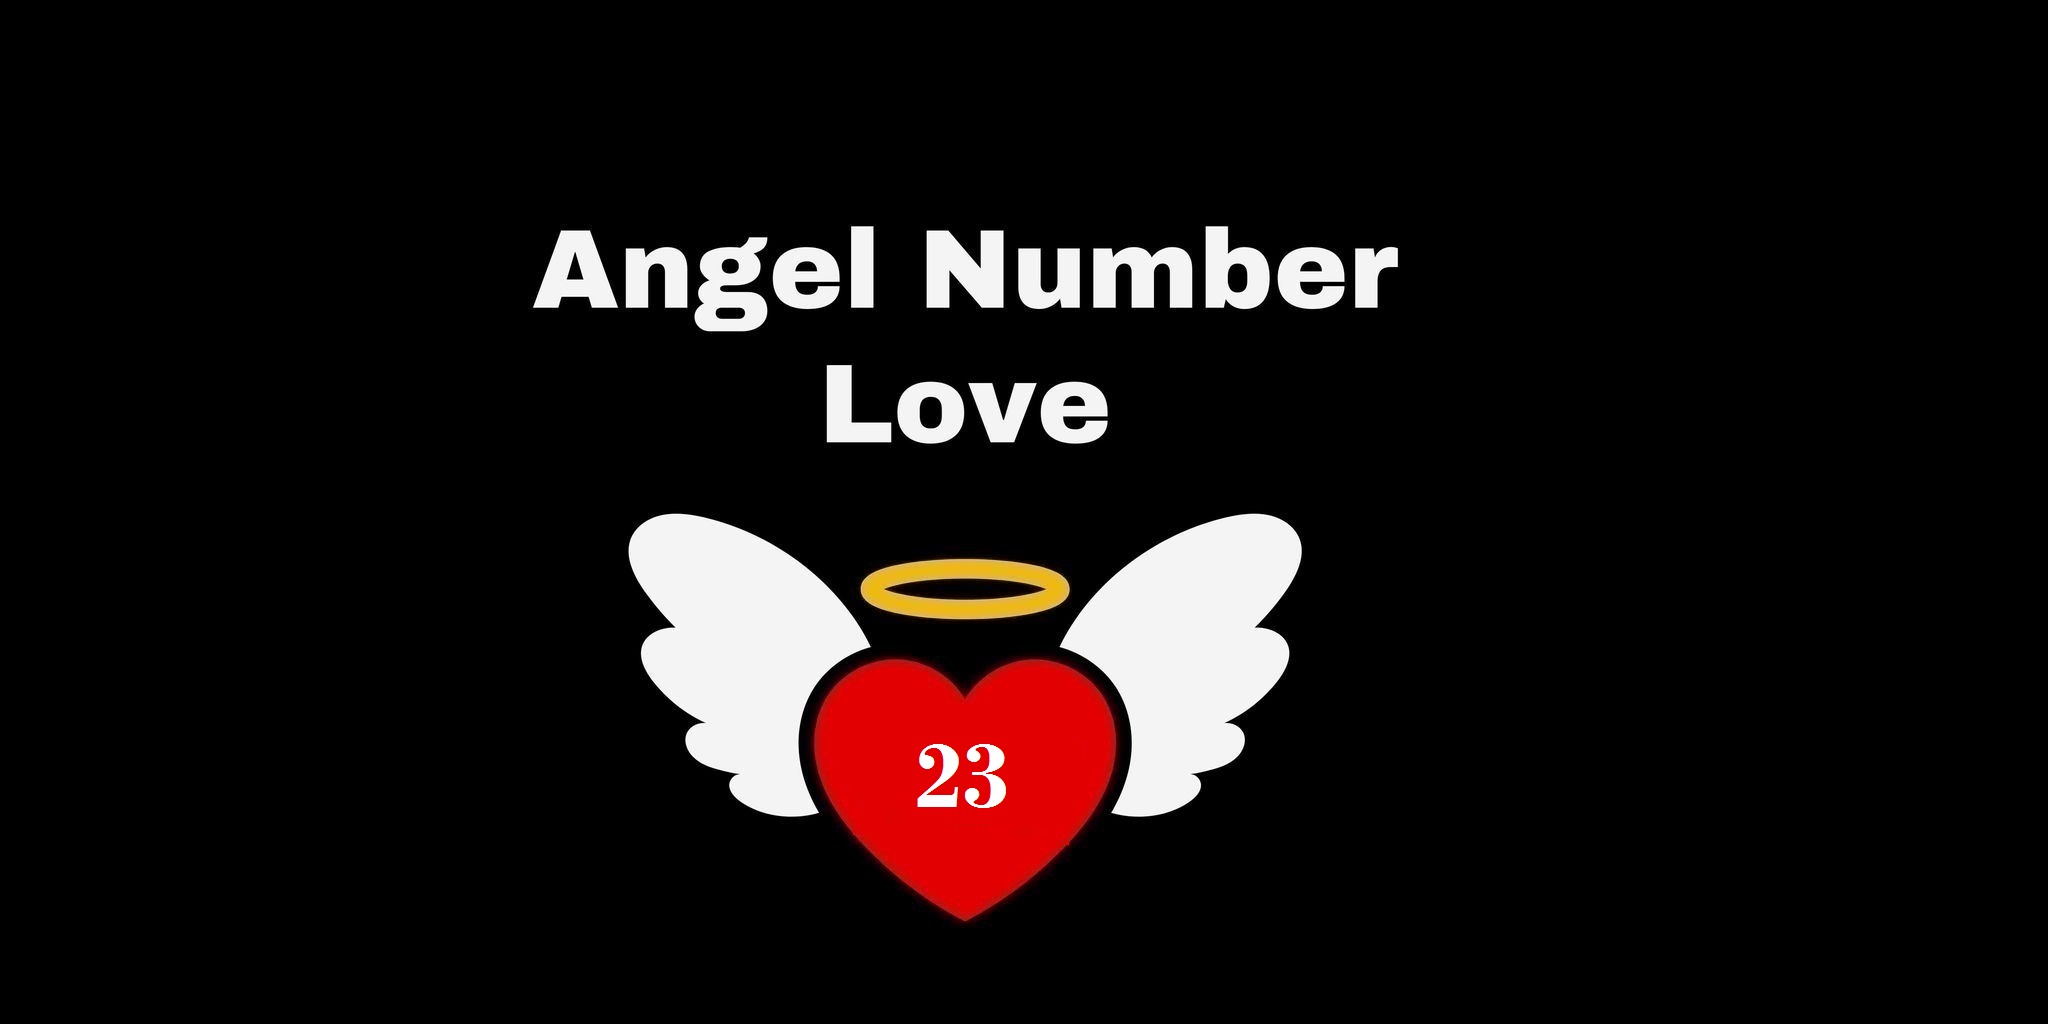 23 Angel Number Meaning In Love